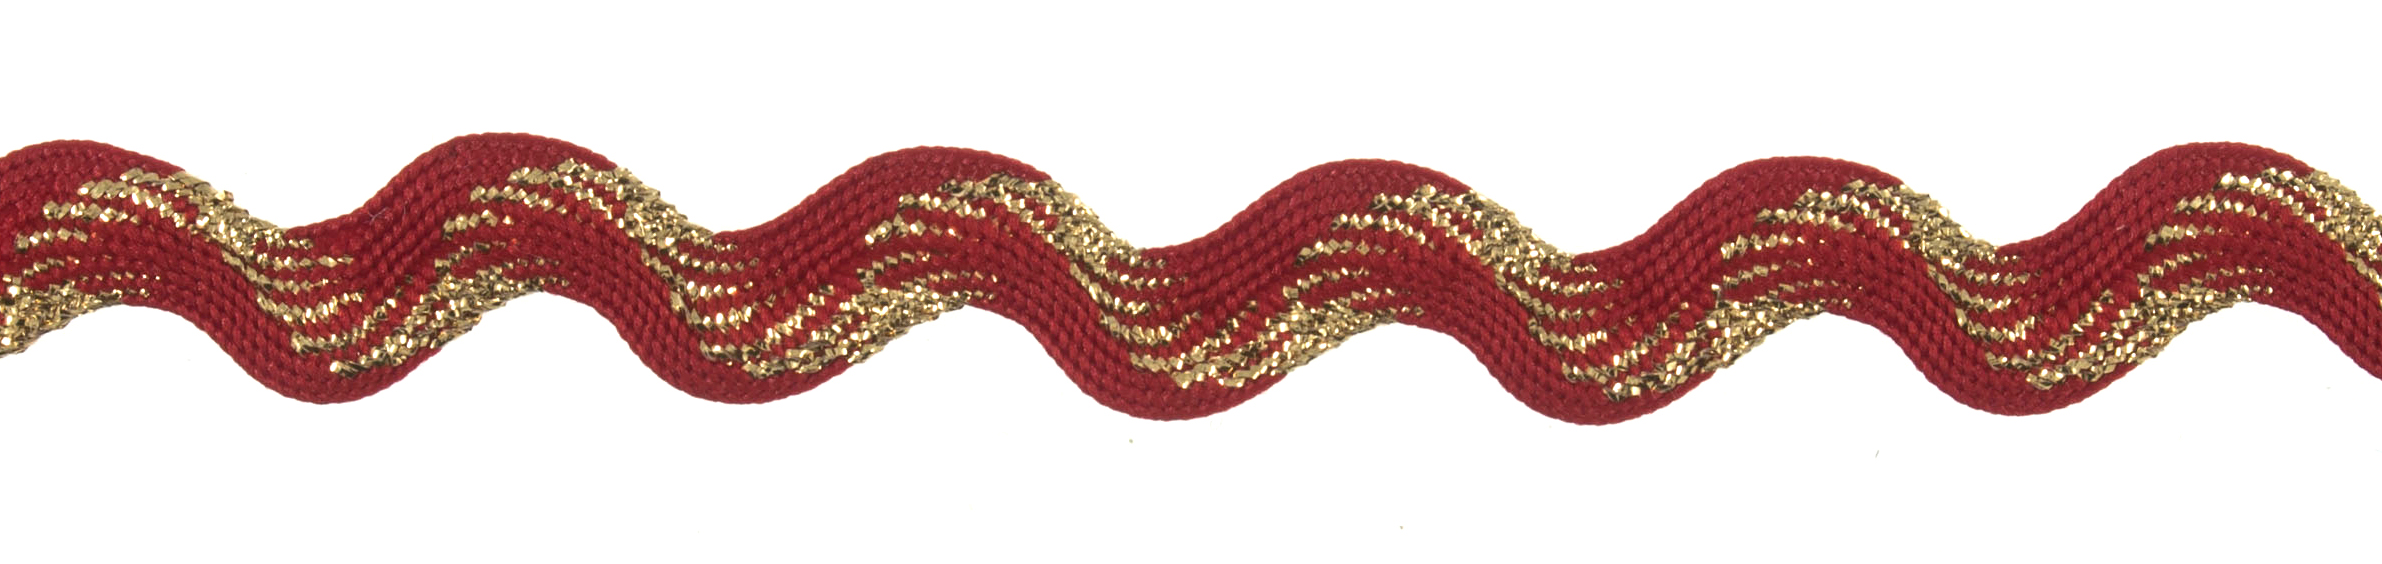 Picture of Trim: Ric Rac: Metallic: 25m x 10mm: Red and Gold